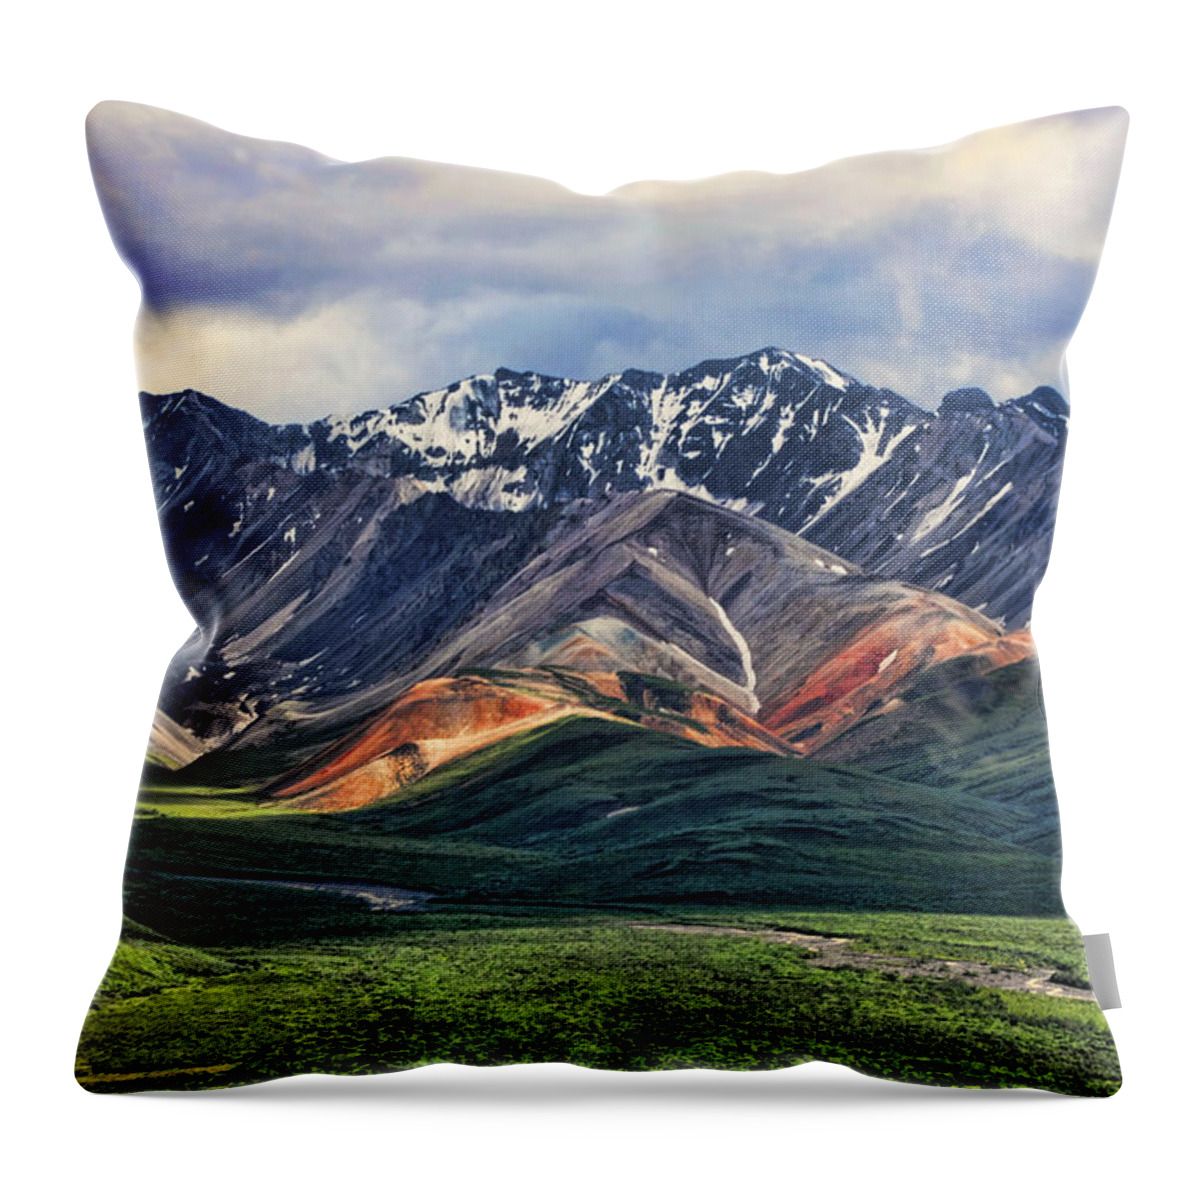 Polychrome Throw Pillow featuring the photograph Polychrome by Heather Applegate